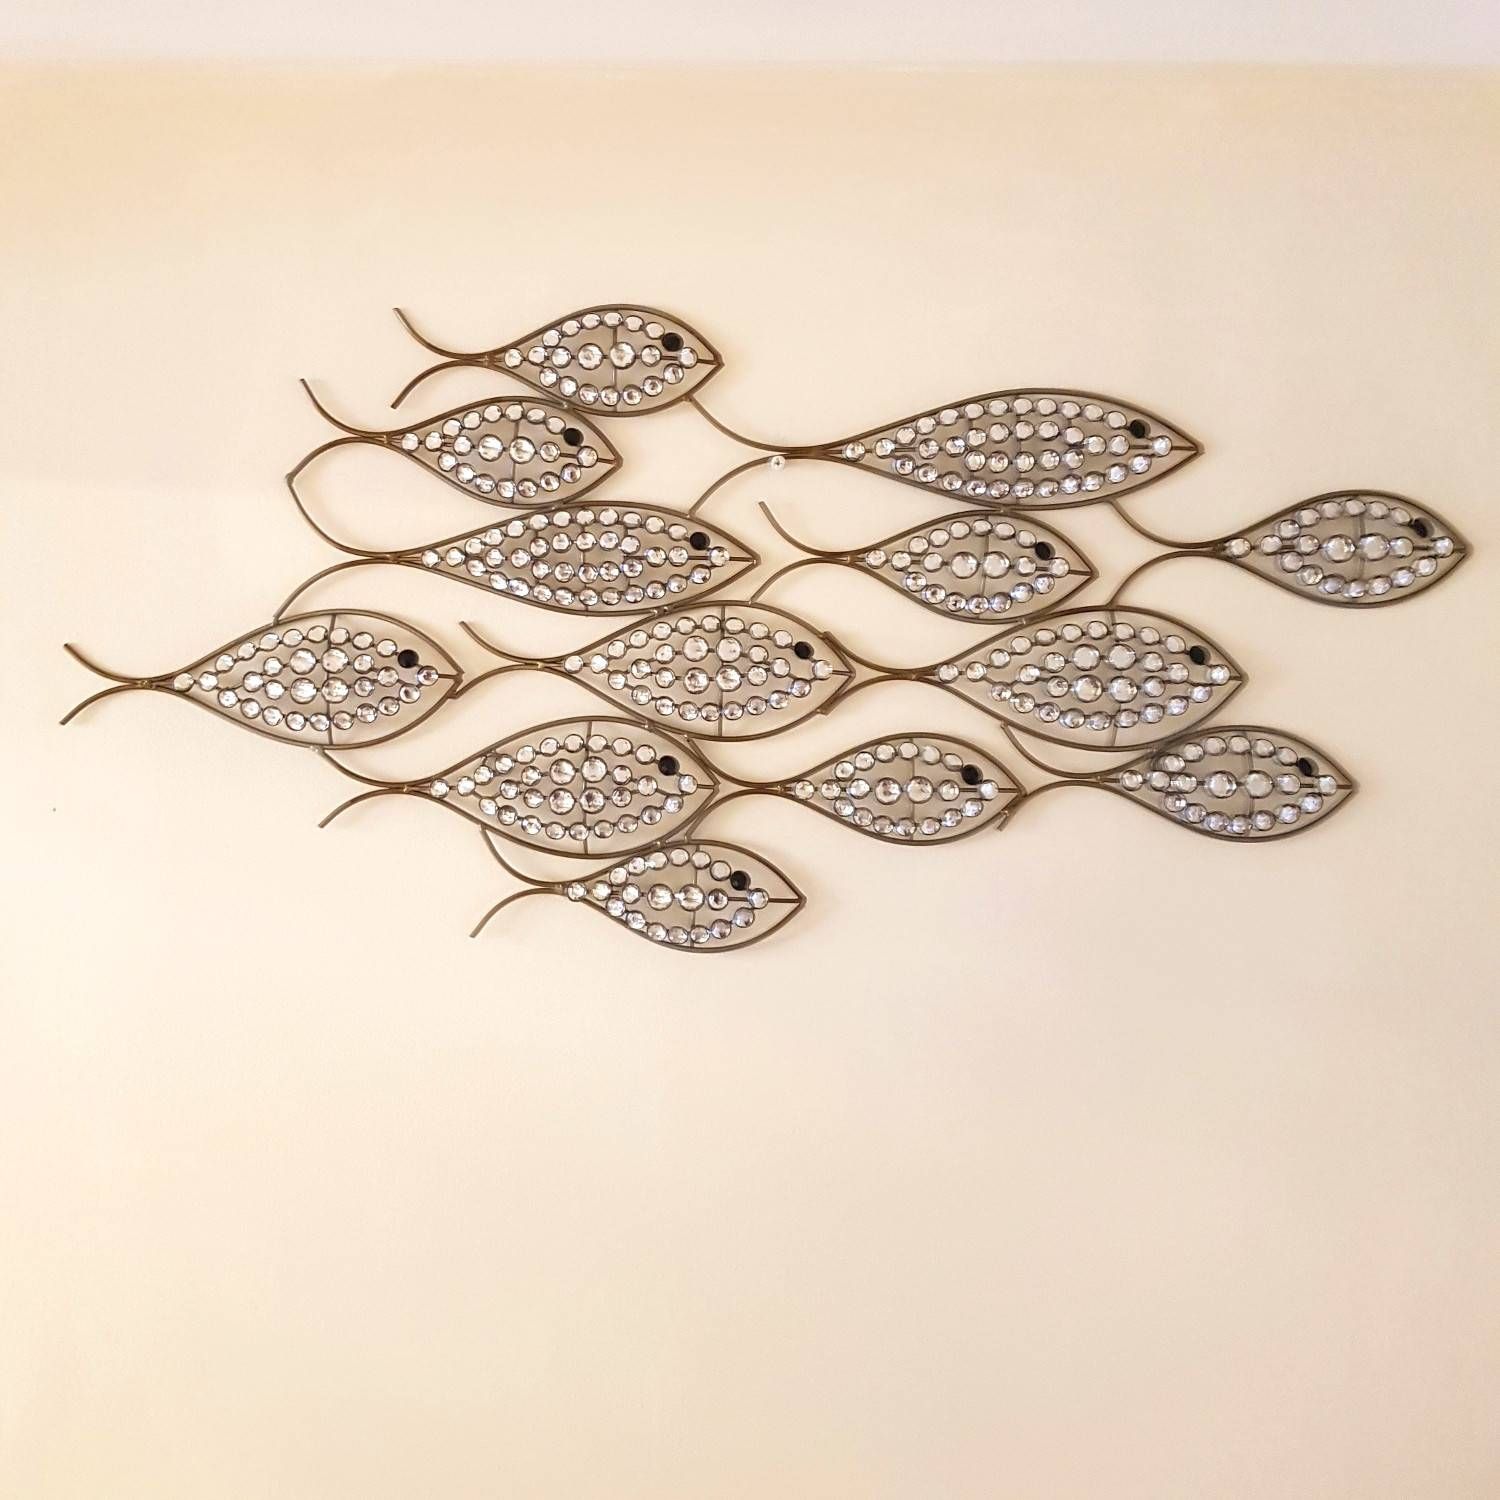 Diamond Fish Shoal Wall Art | Ebay With Regard To Most Up To Date Shoal Of Fish Metal Wall Art (Gallery 25 of 30)